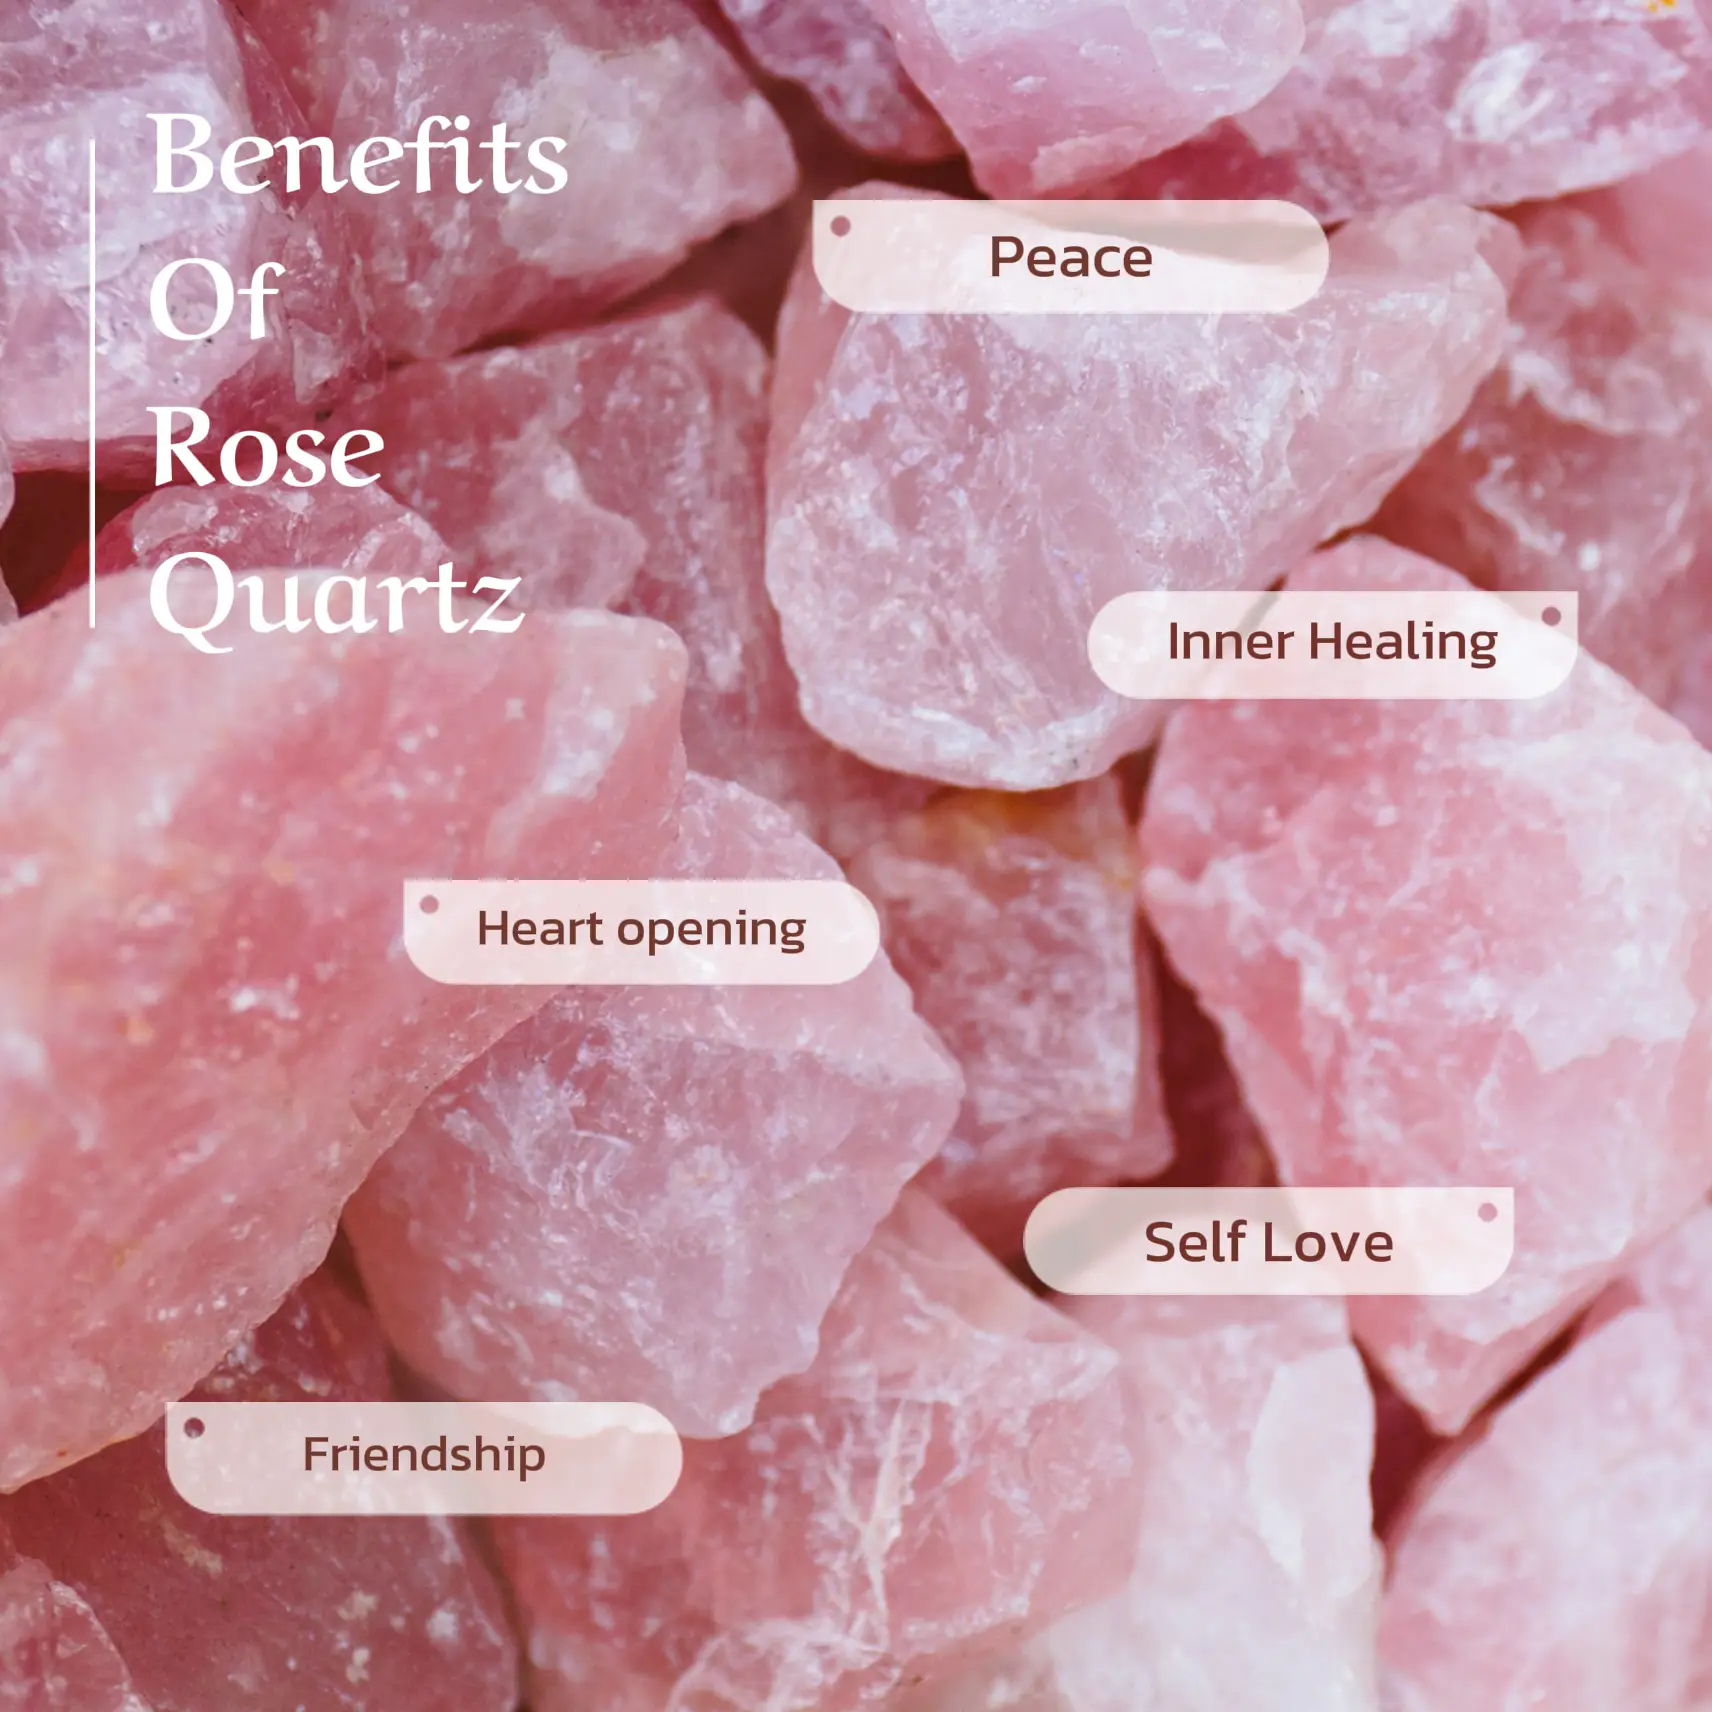 Rose Quartz Benefits, Gallery posted by BROOKE RADDING